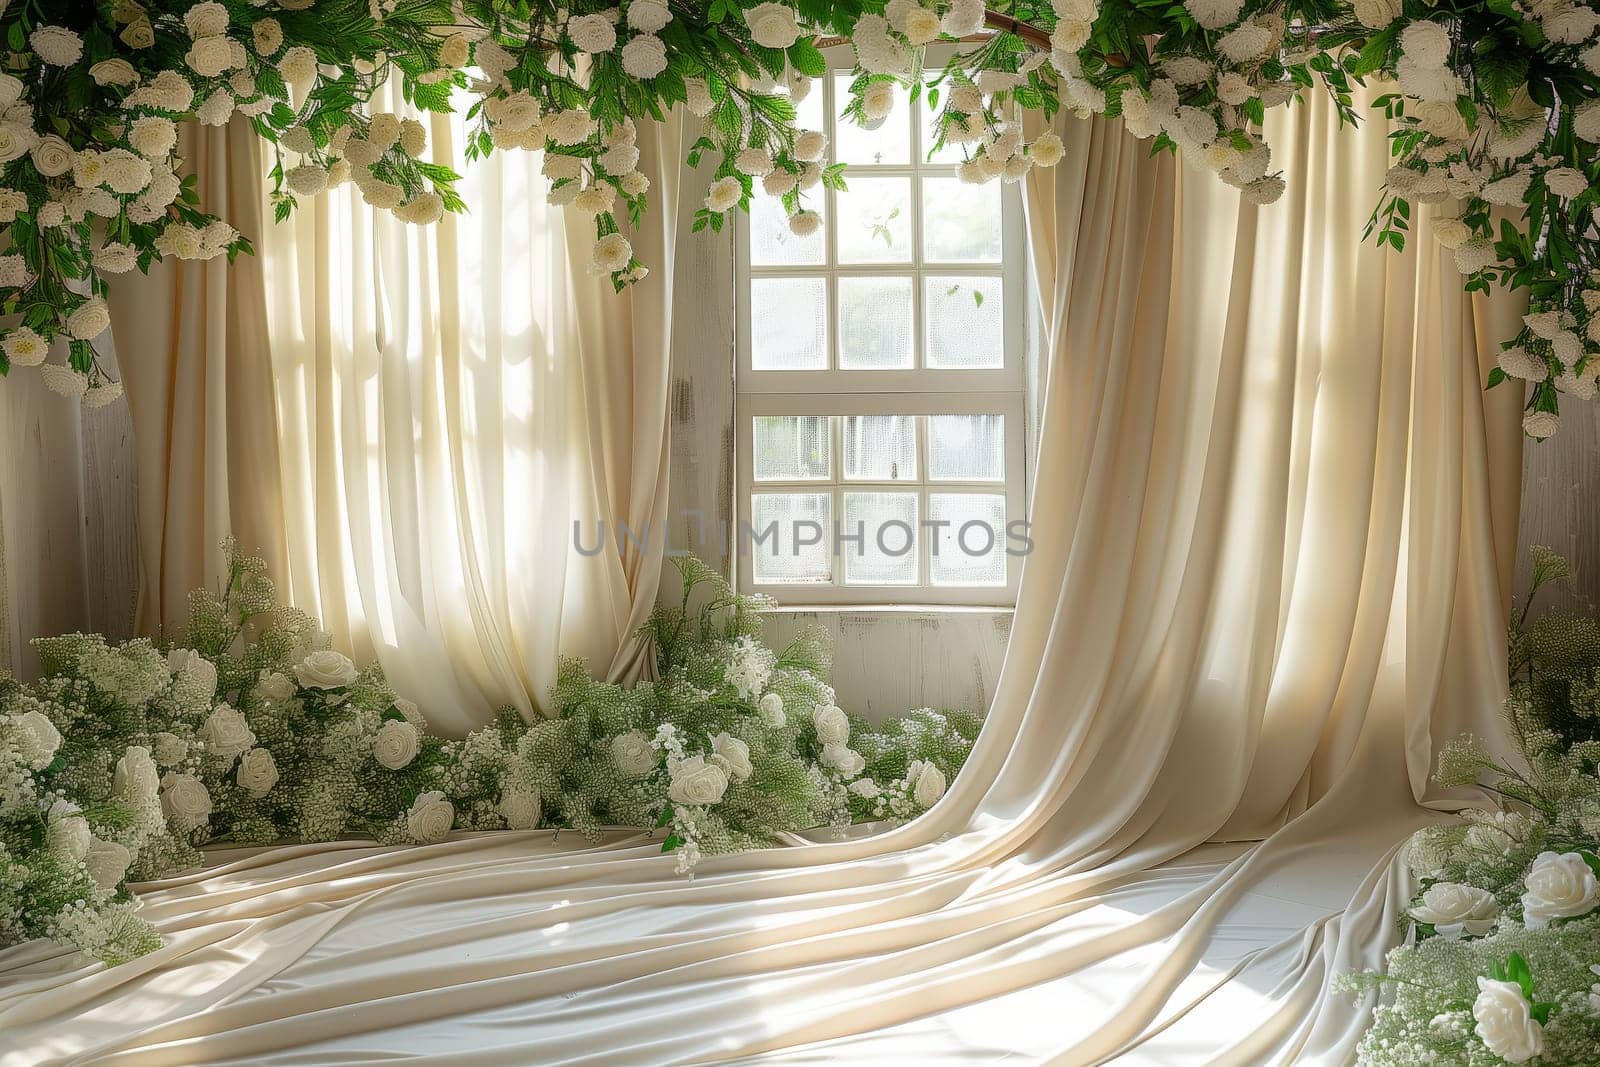 A room with white curtains, flowers hanging from the ceiling by richwolf